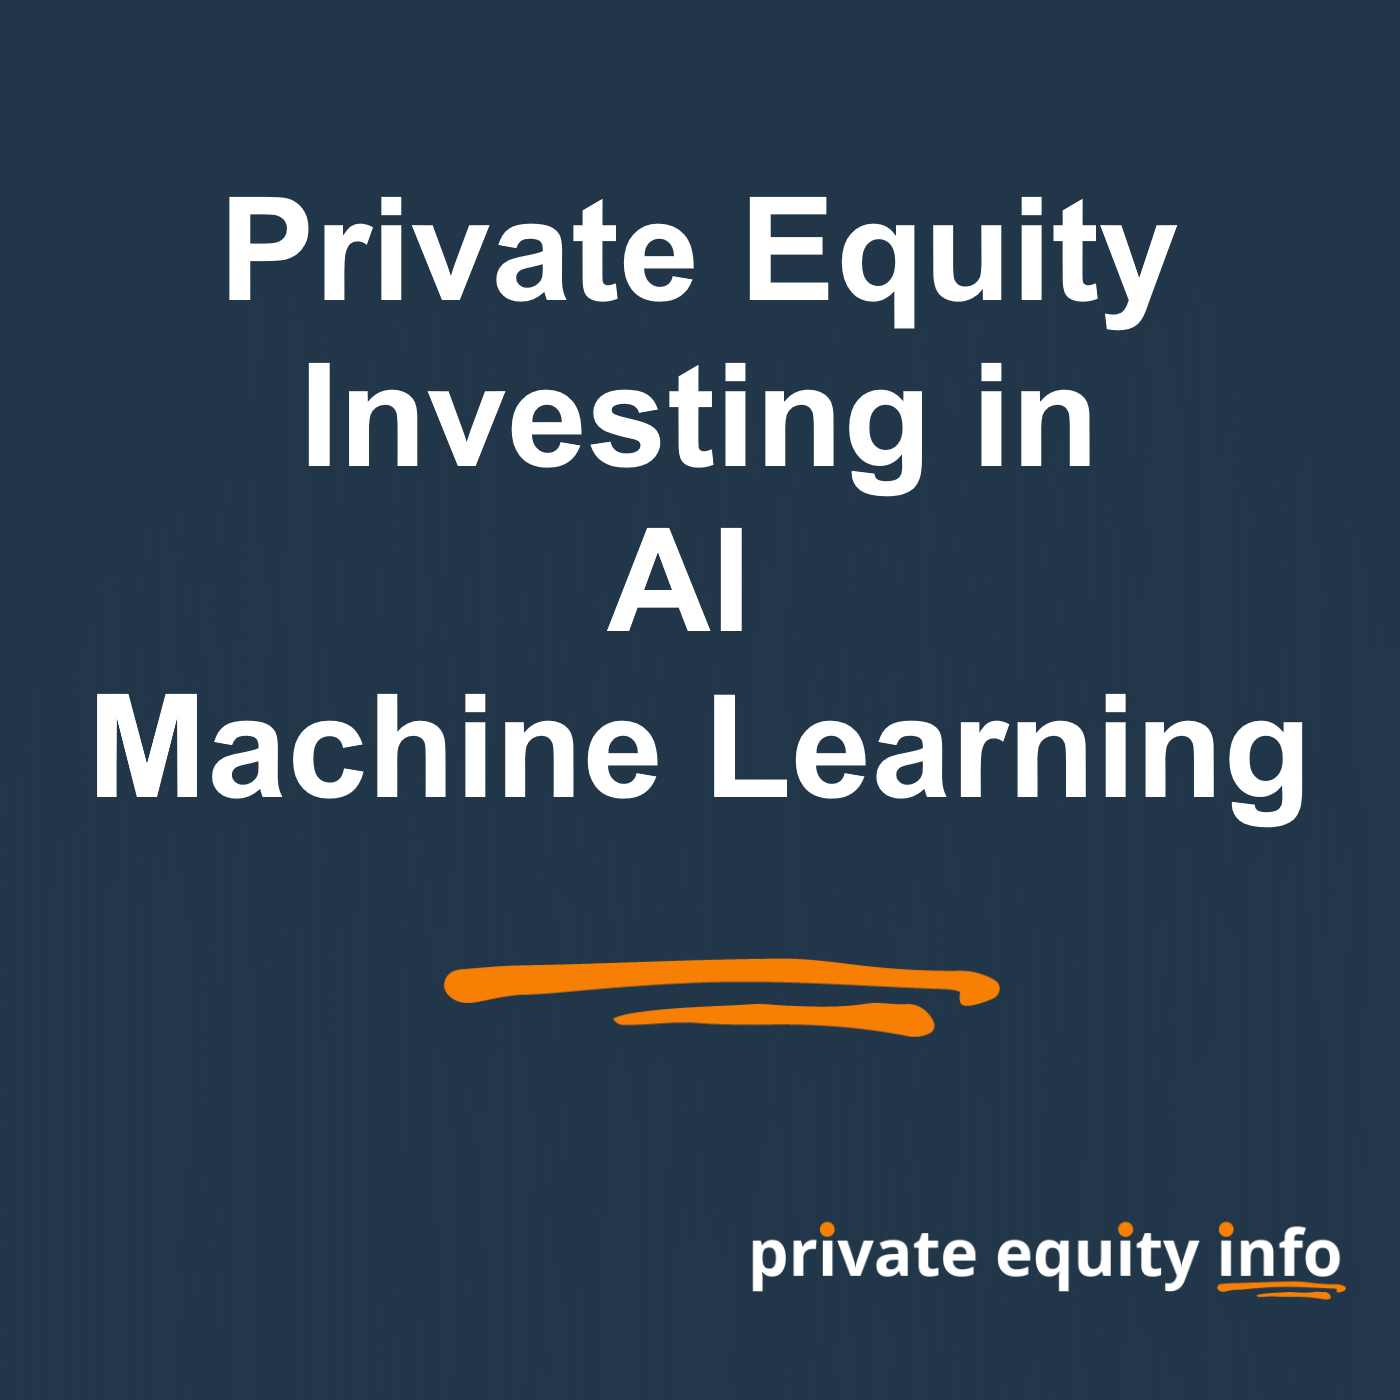 Private Equity Investments in Artificial Intelligence and Machine Learning